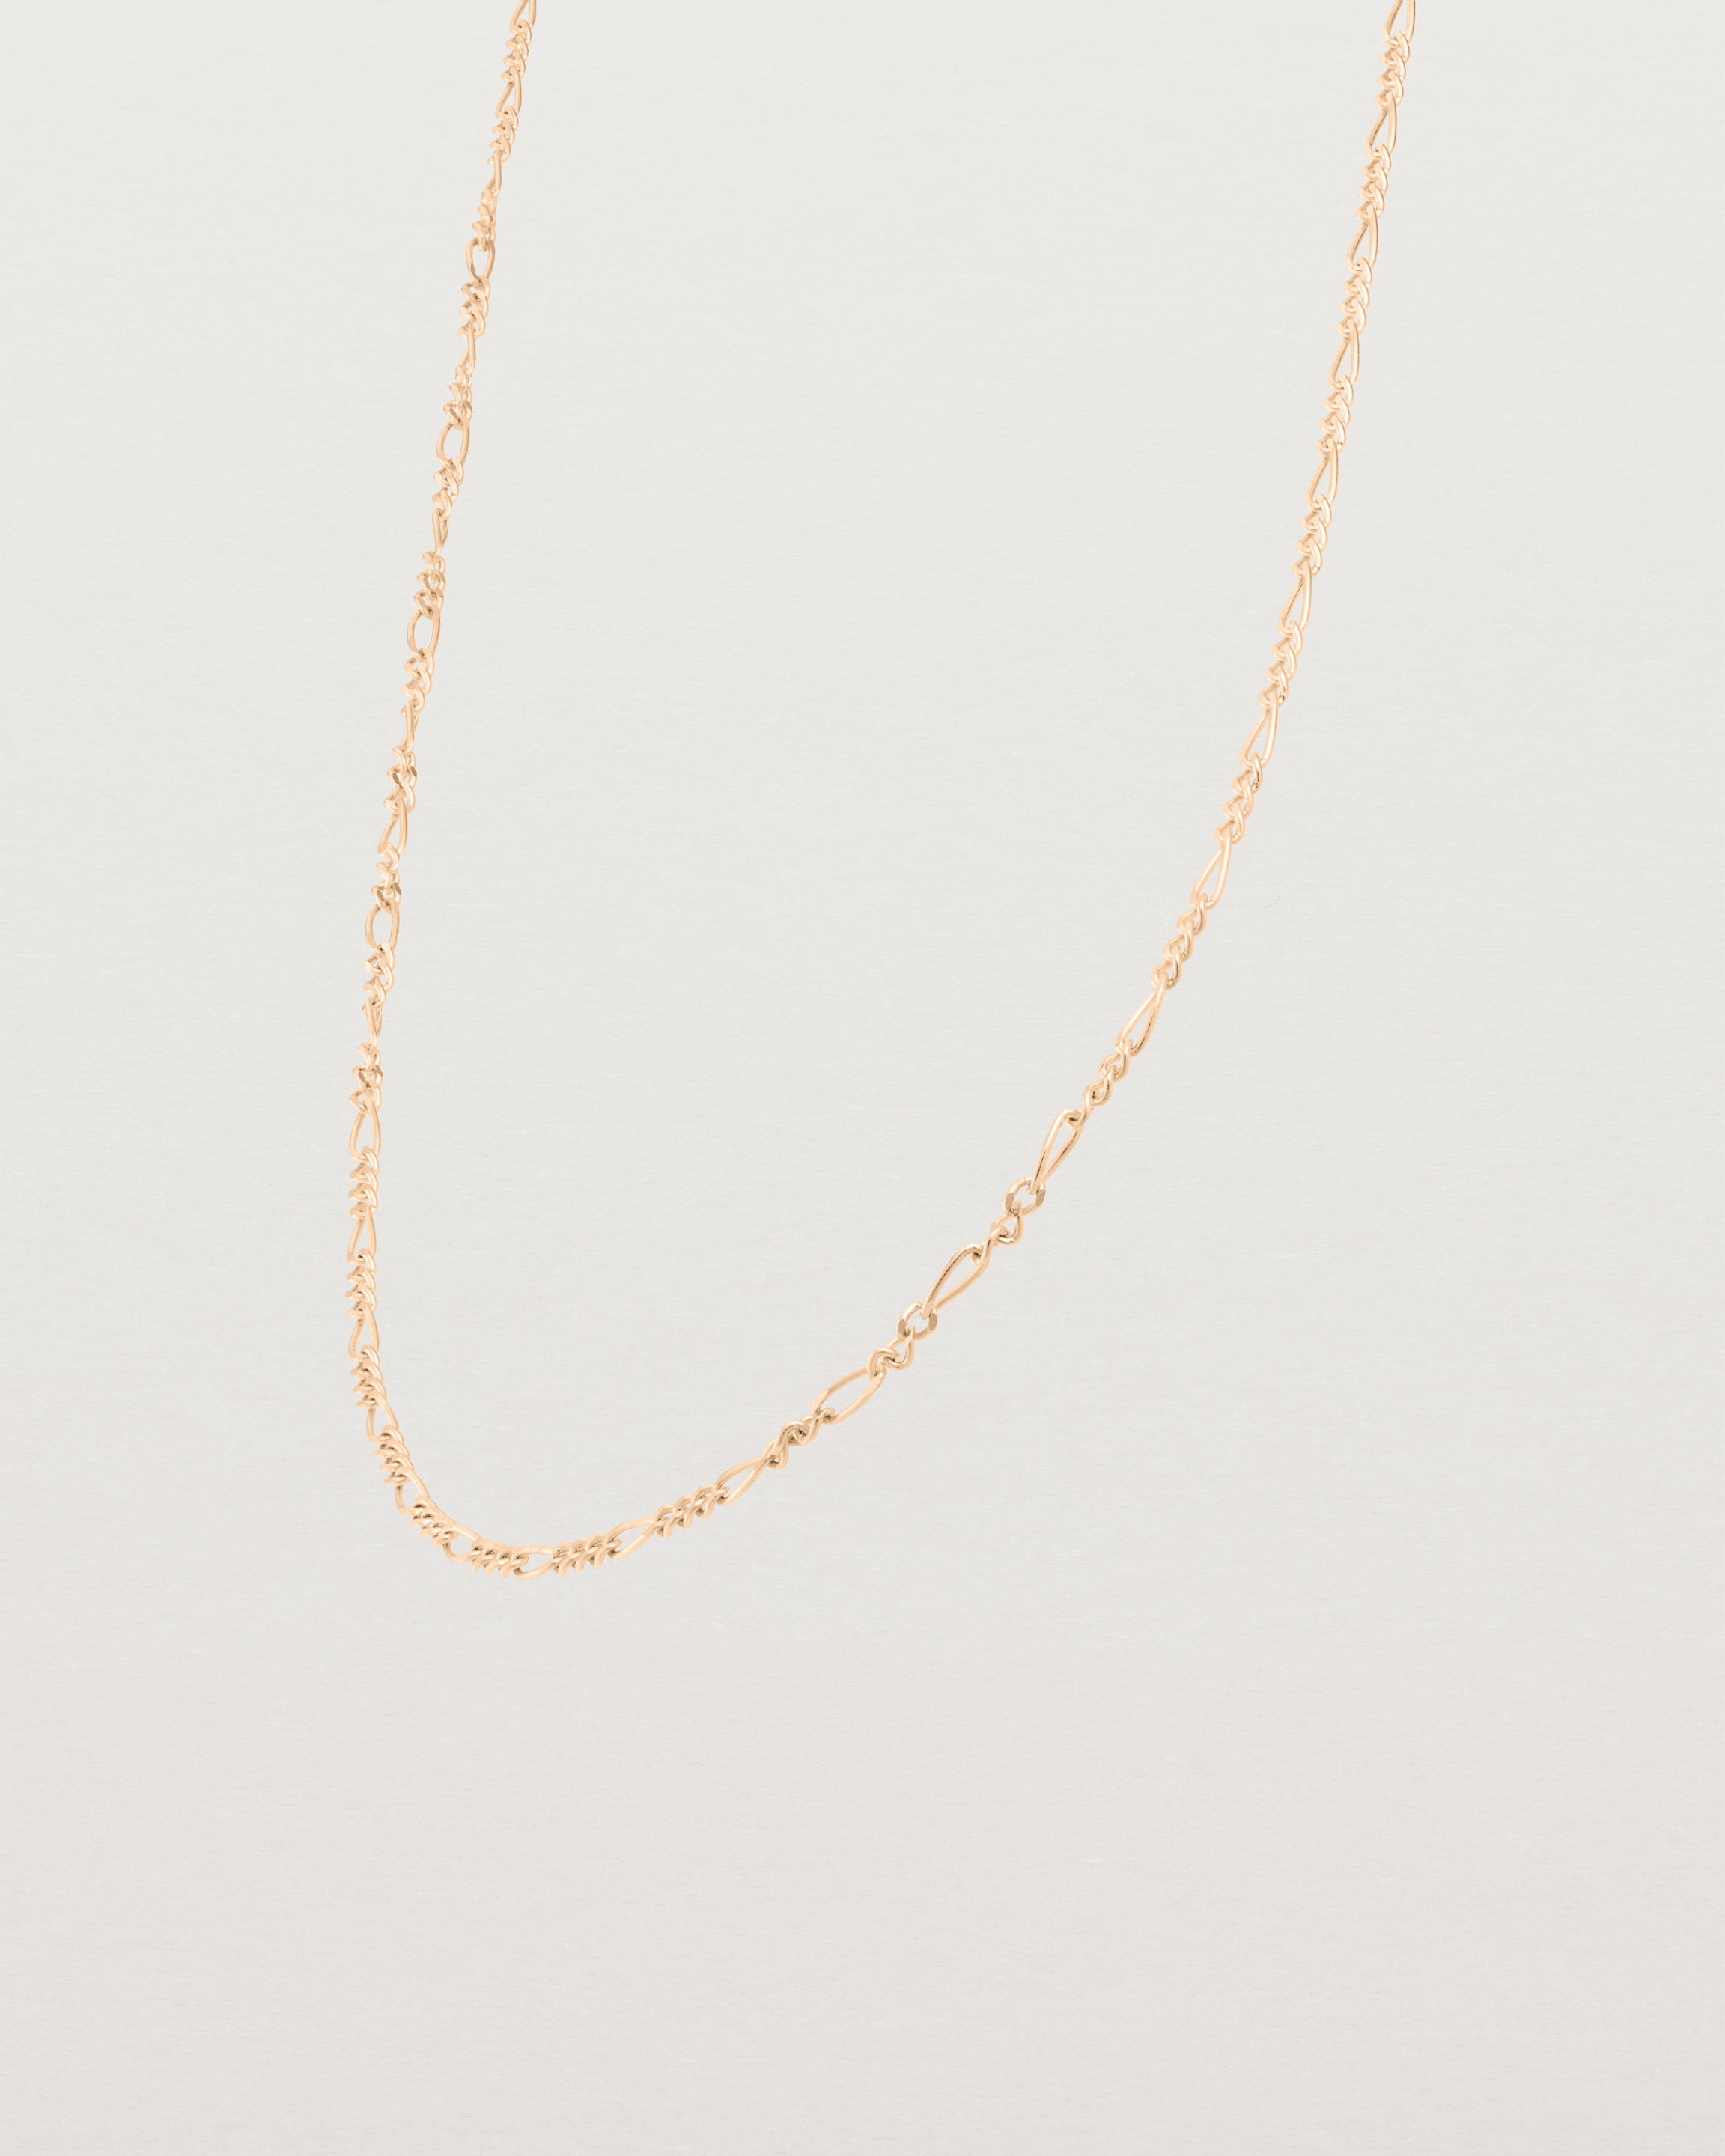 Our fine Figaro chain in rose gold